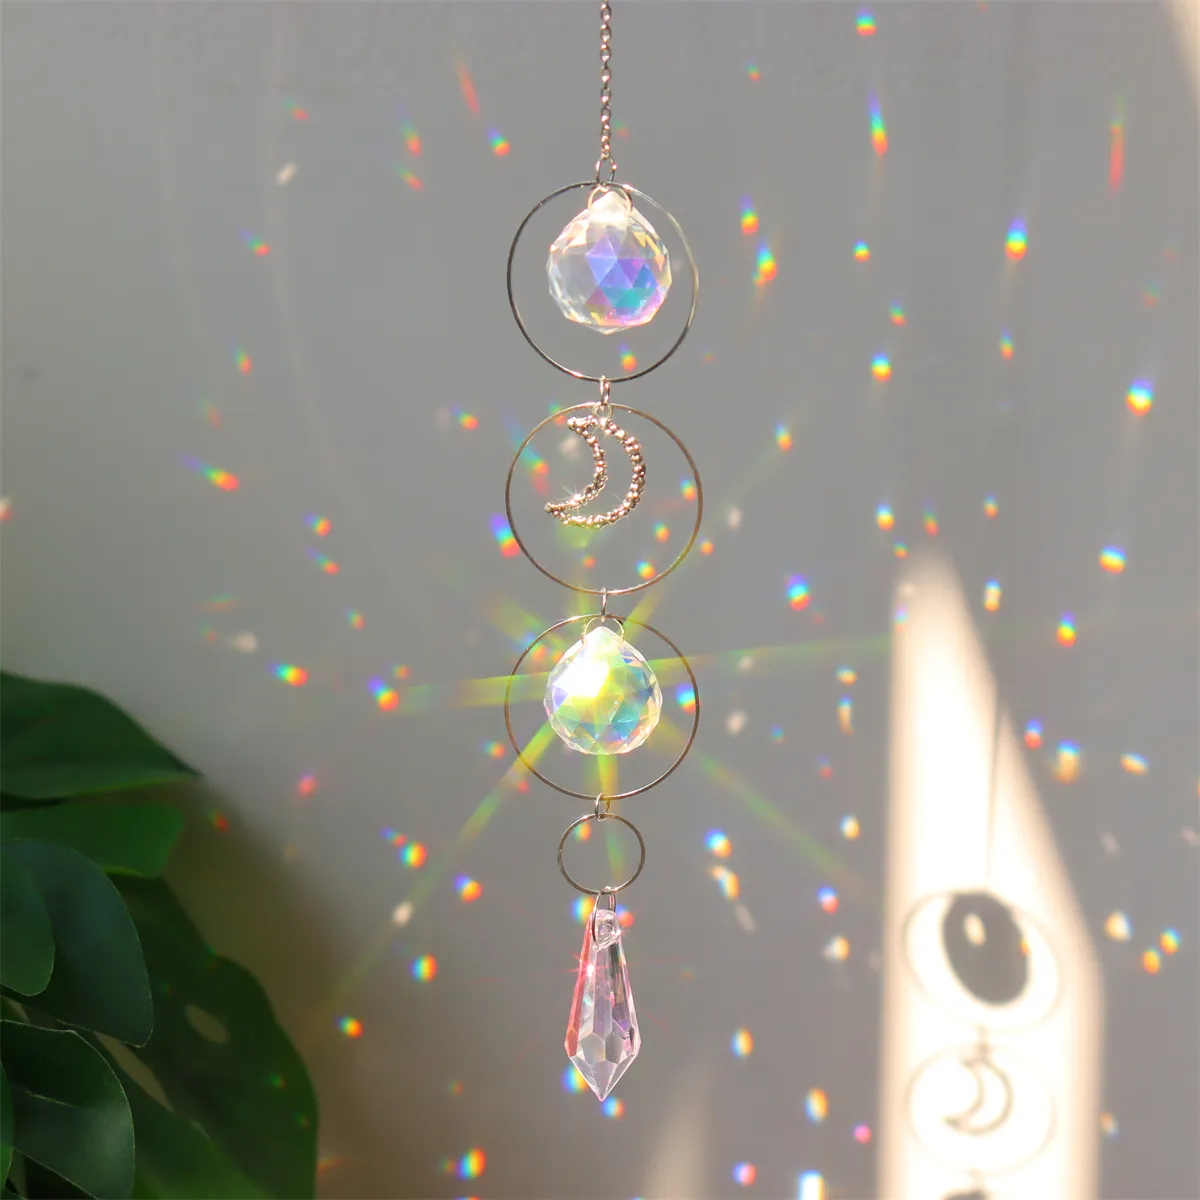 Crystal Ball Wind Chime Hanging Sun Catcher Rainbow Maker Decoration Hanging Prism For Window Decor